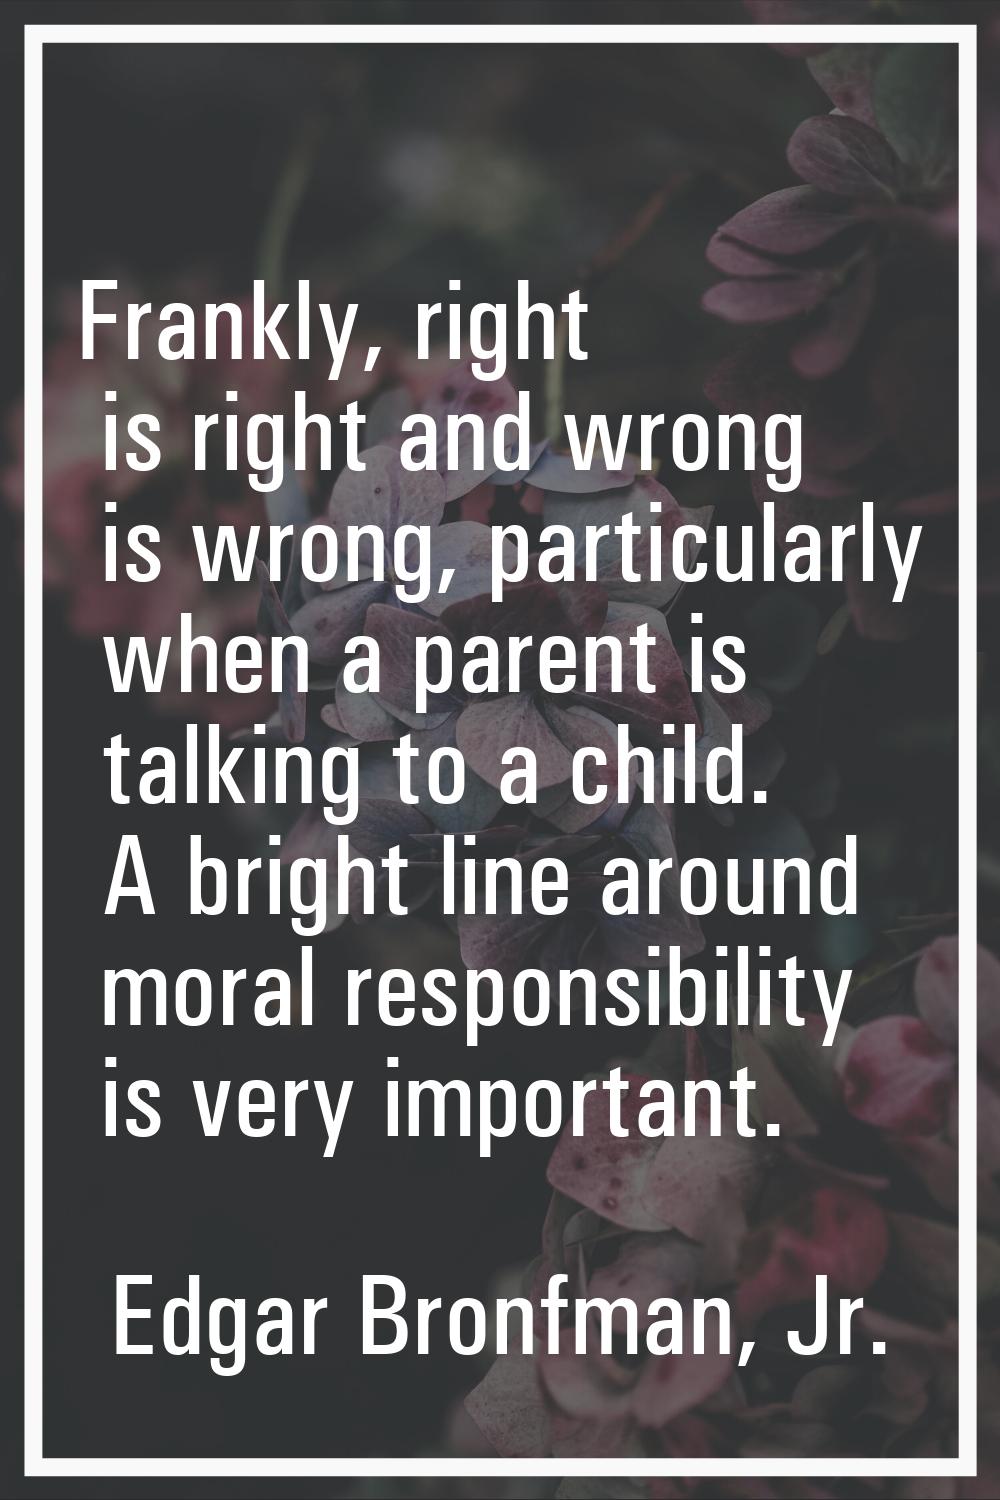 Frankly, right is right and wrong is wrong, particularly when a parent is talking to a child. A bri